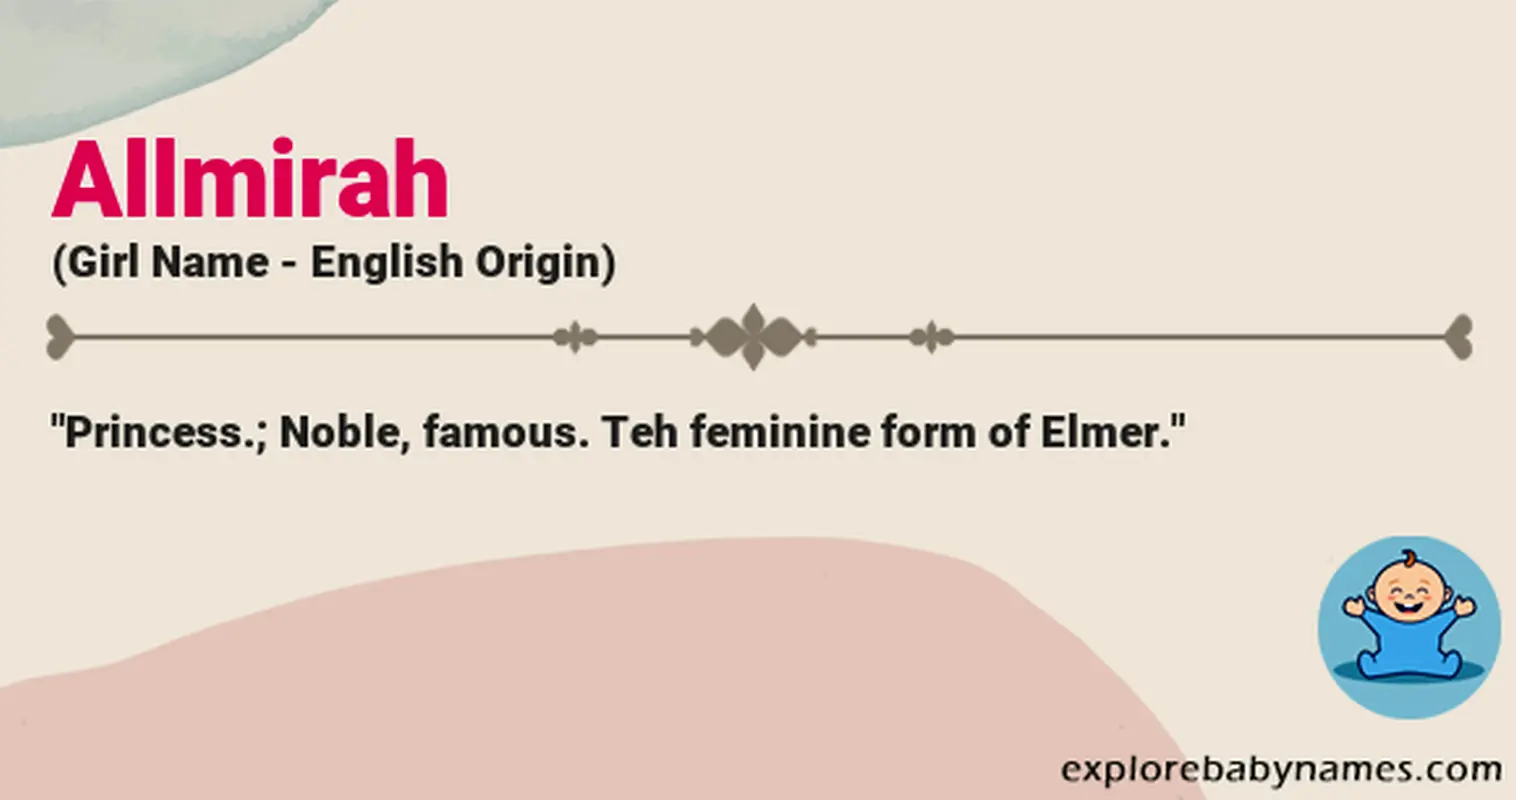 Meaning of Allmirah